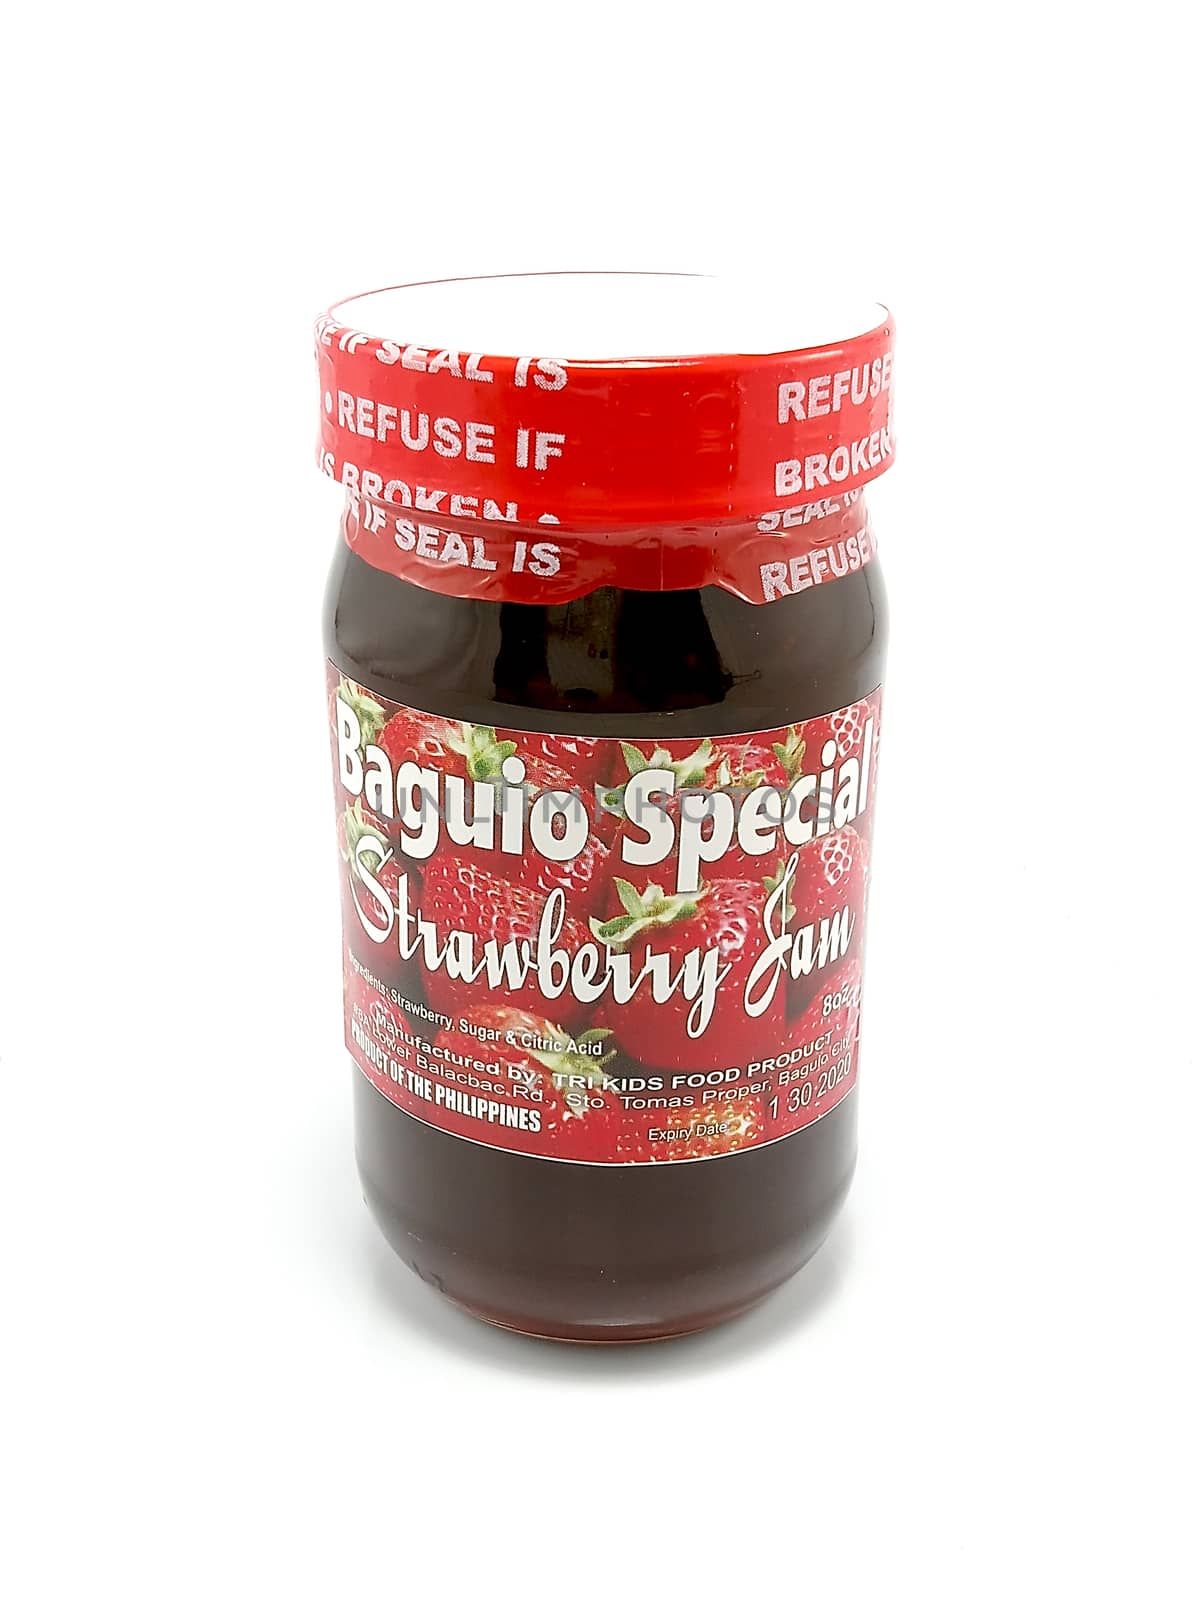 Baguio special strawberry jam bottle in Manila, Philippines by imwaltersy